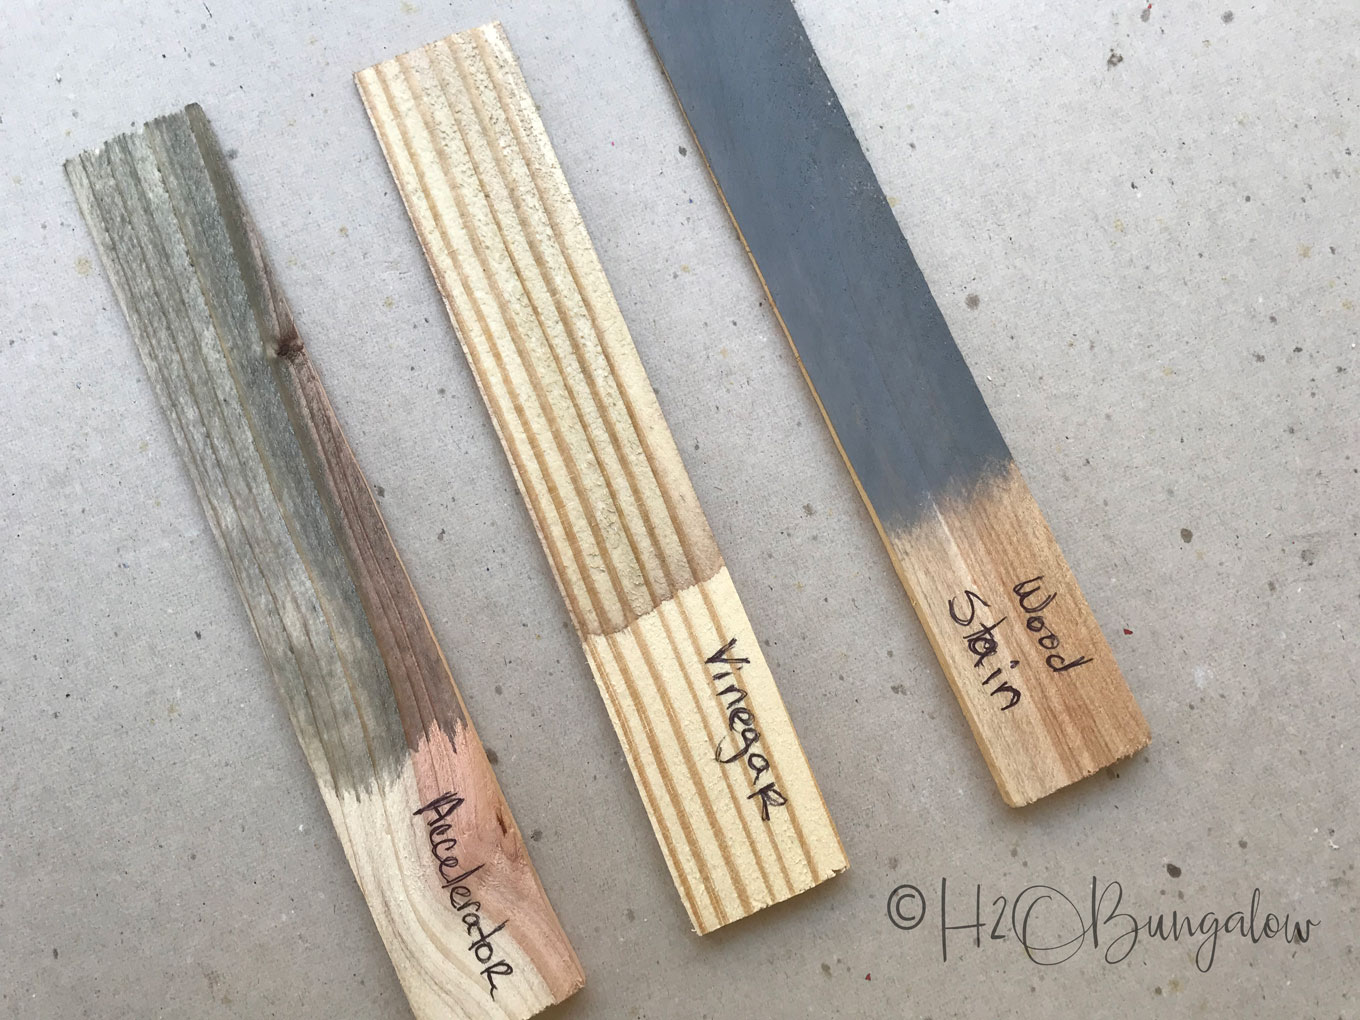 I compare 3 ways to age and weather wood using 2 popular stain products and a DIY weathered wood stain and the pros and cons. Recipe for DIY wood stain included.